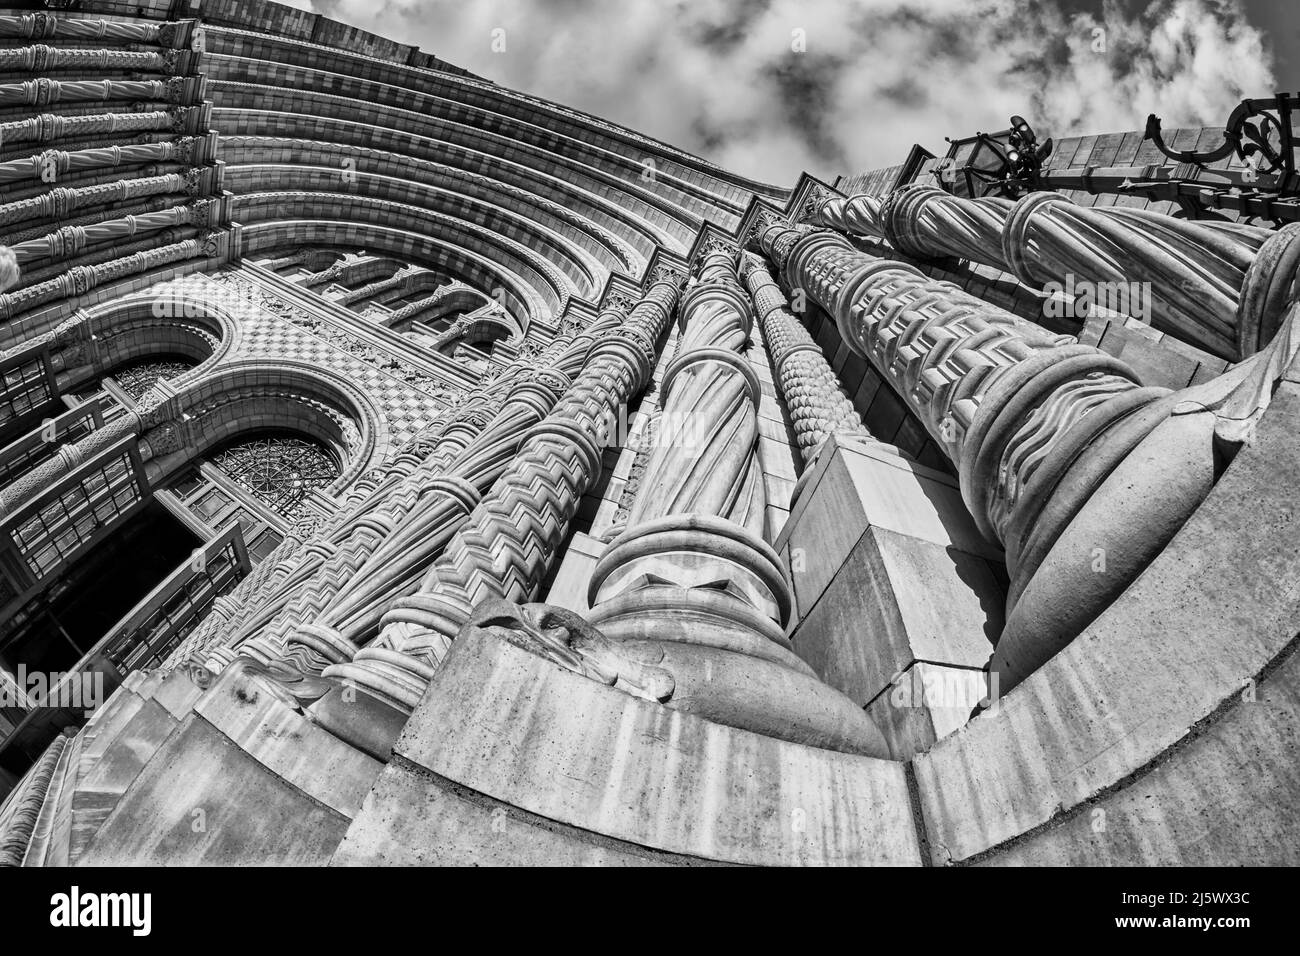 The Natural History Museum, Londres, porte angle ultra-large Banque D'Images